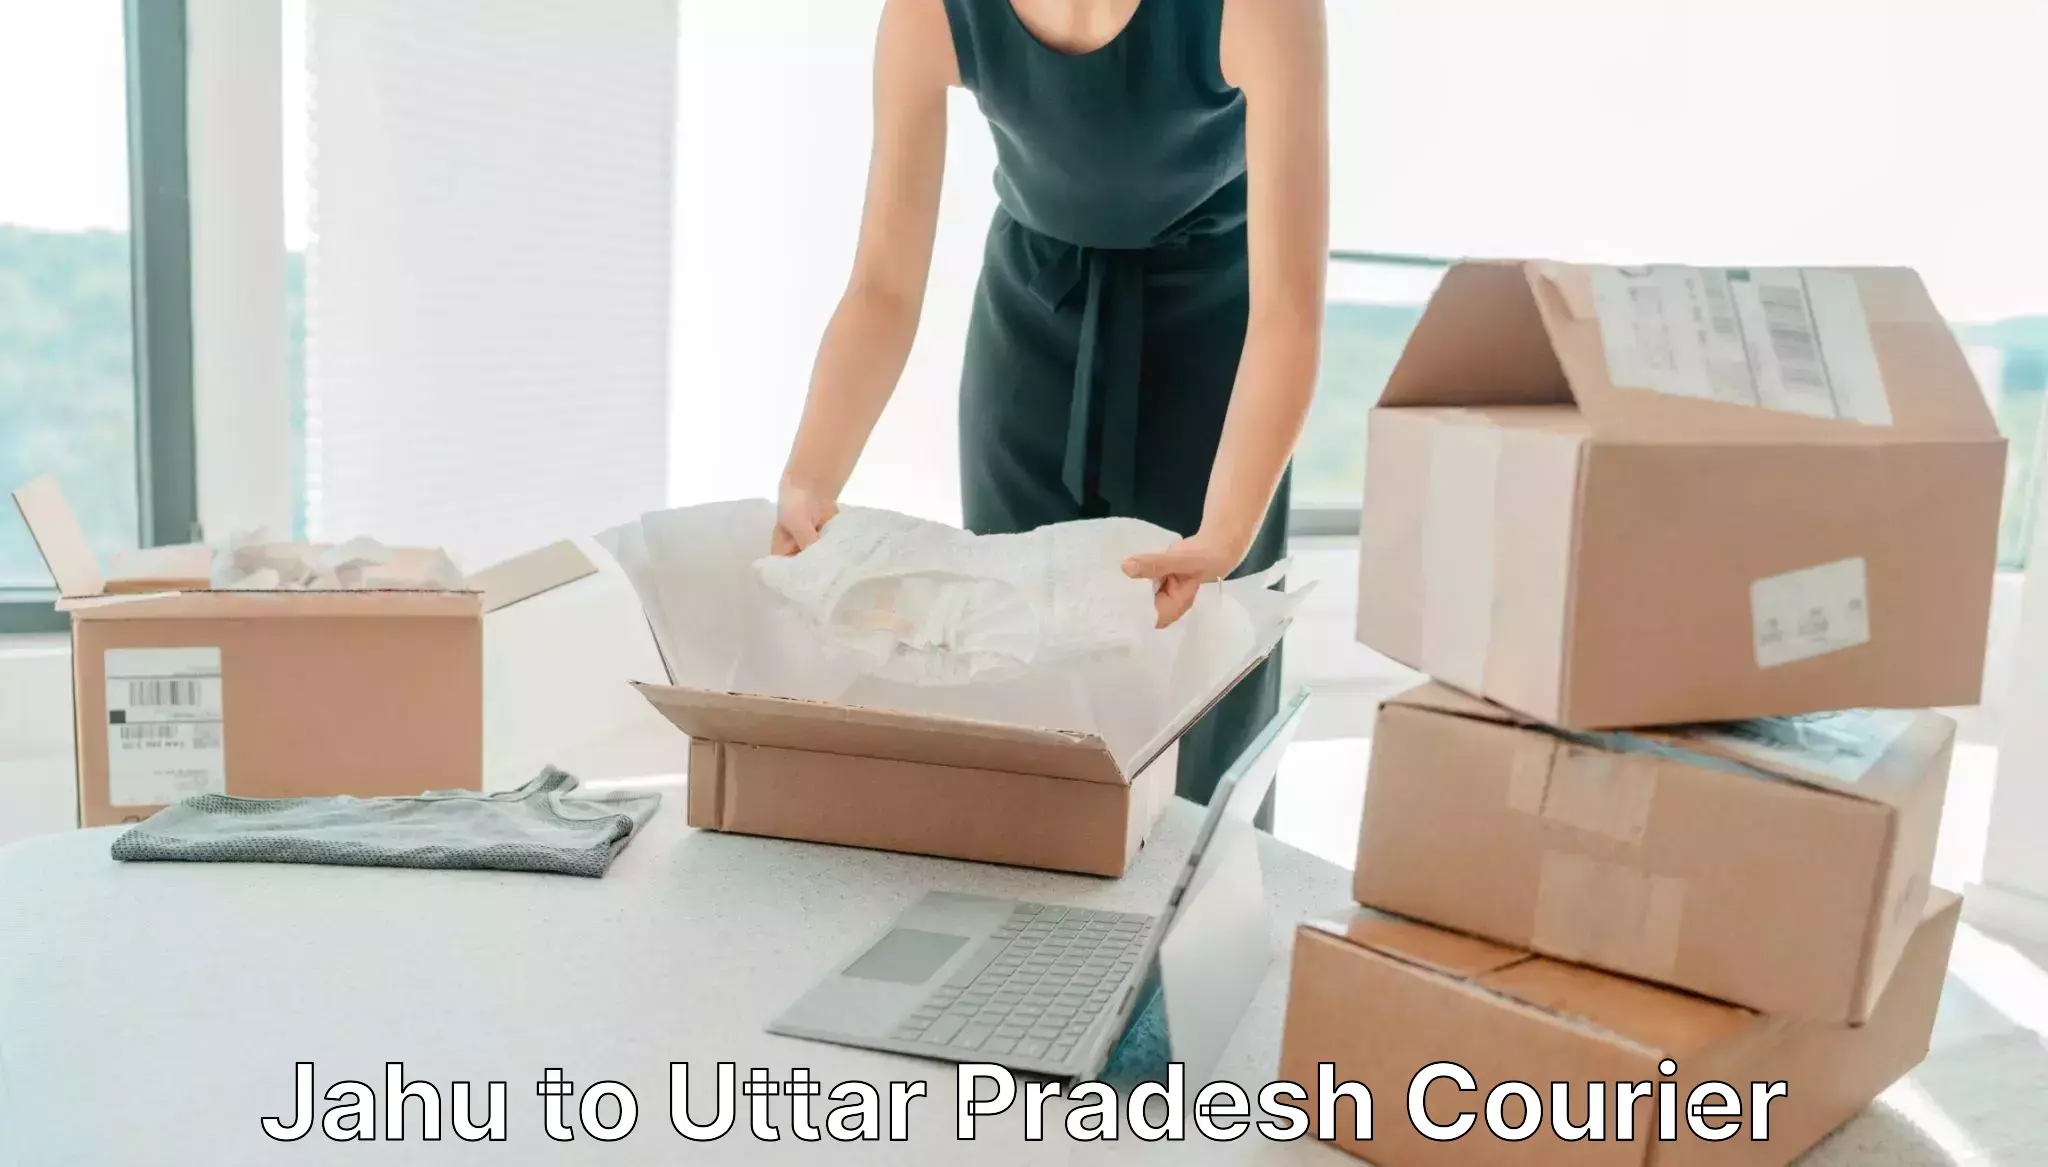 Fast delivery service Jahu to Firozabad